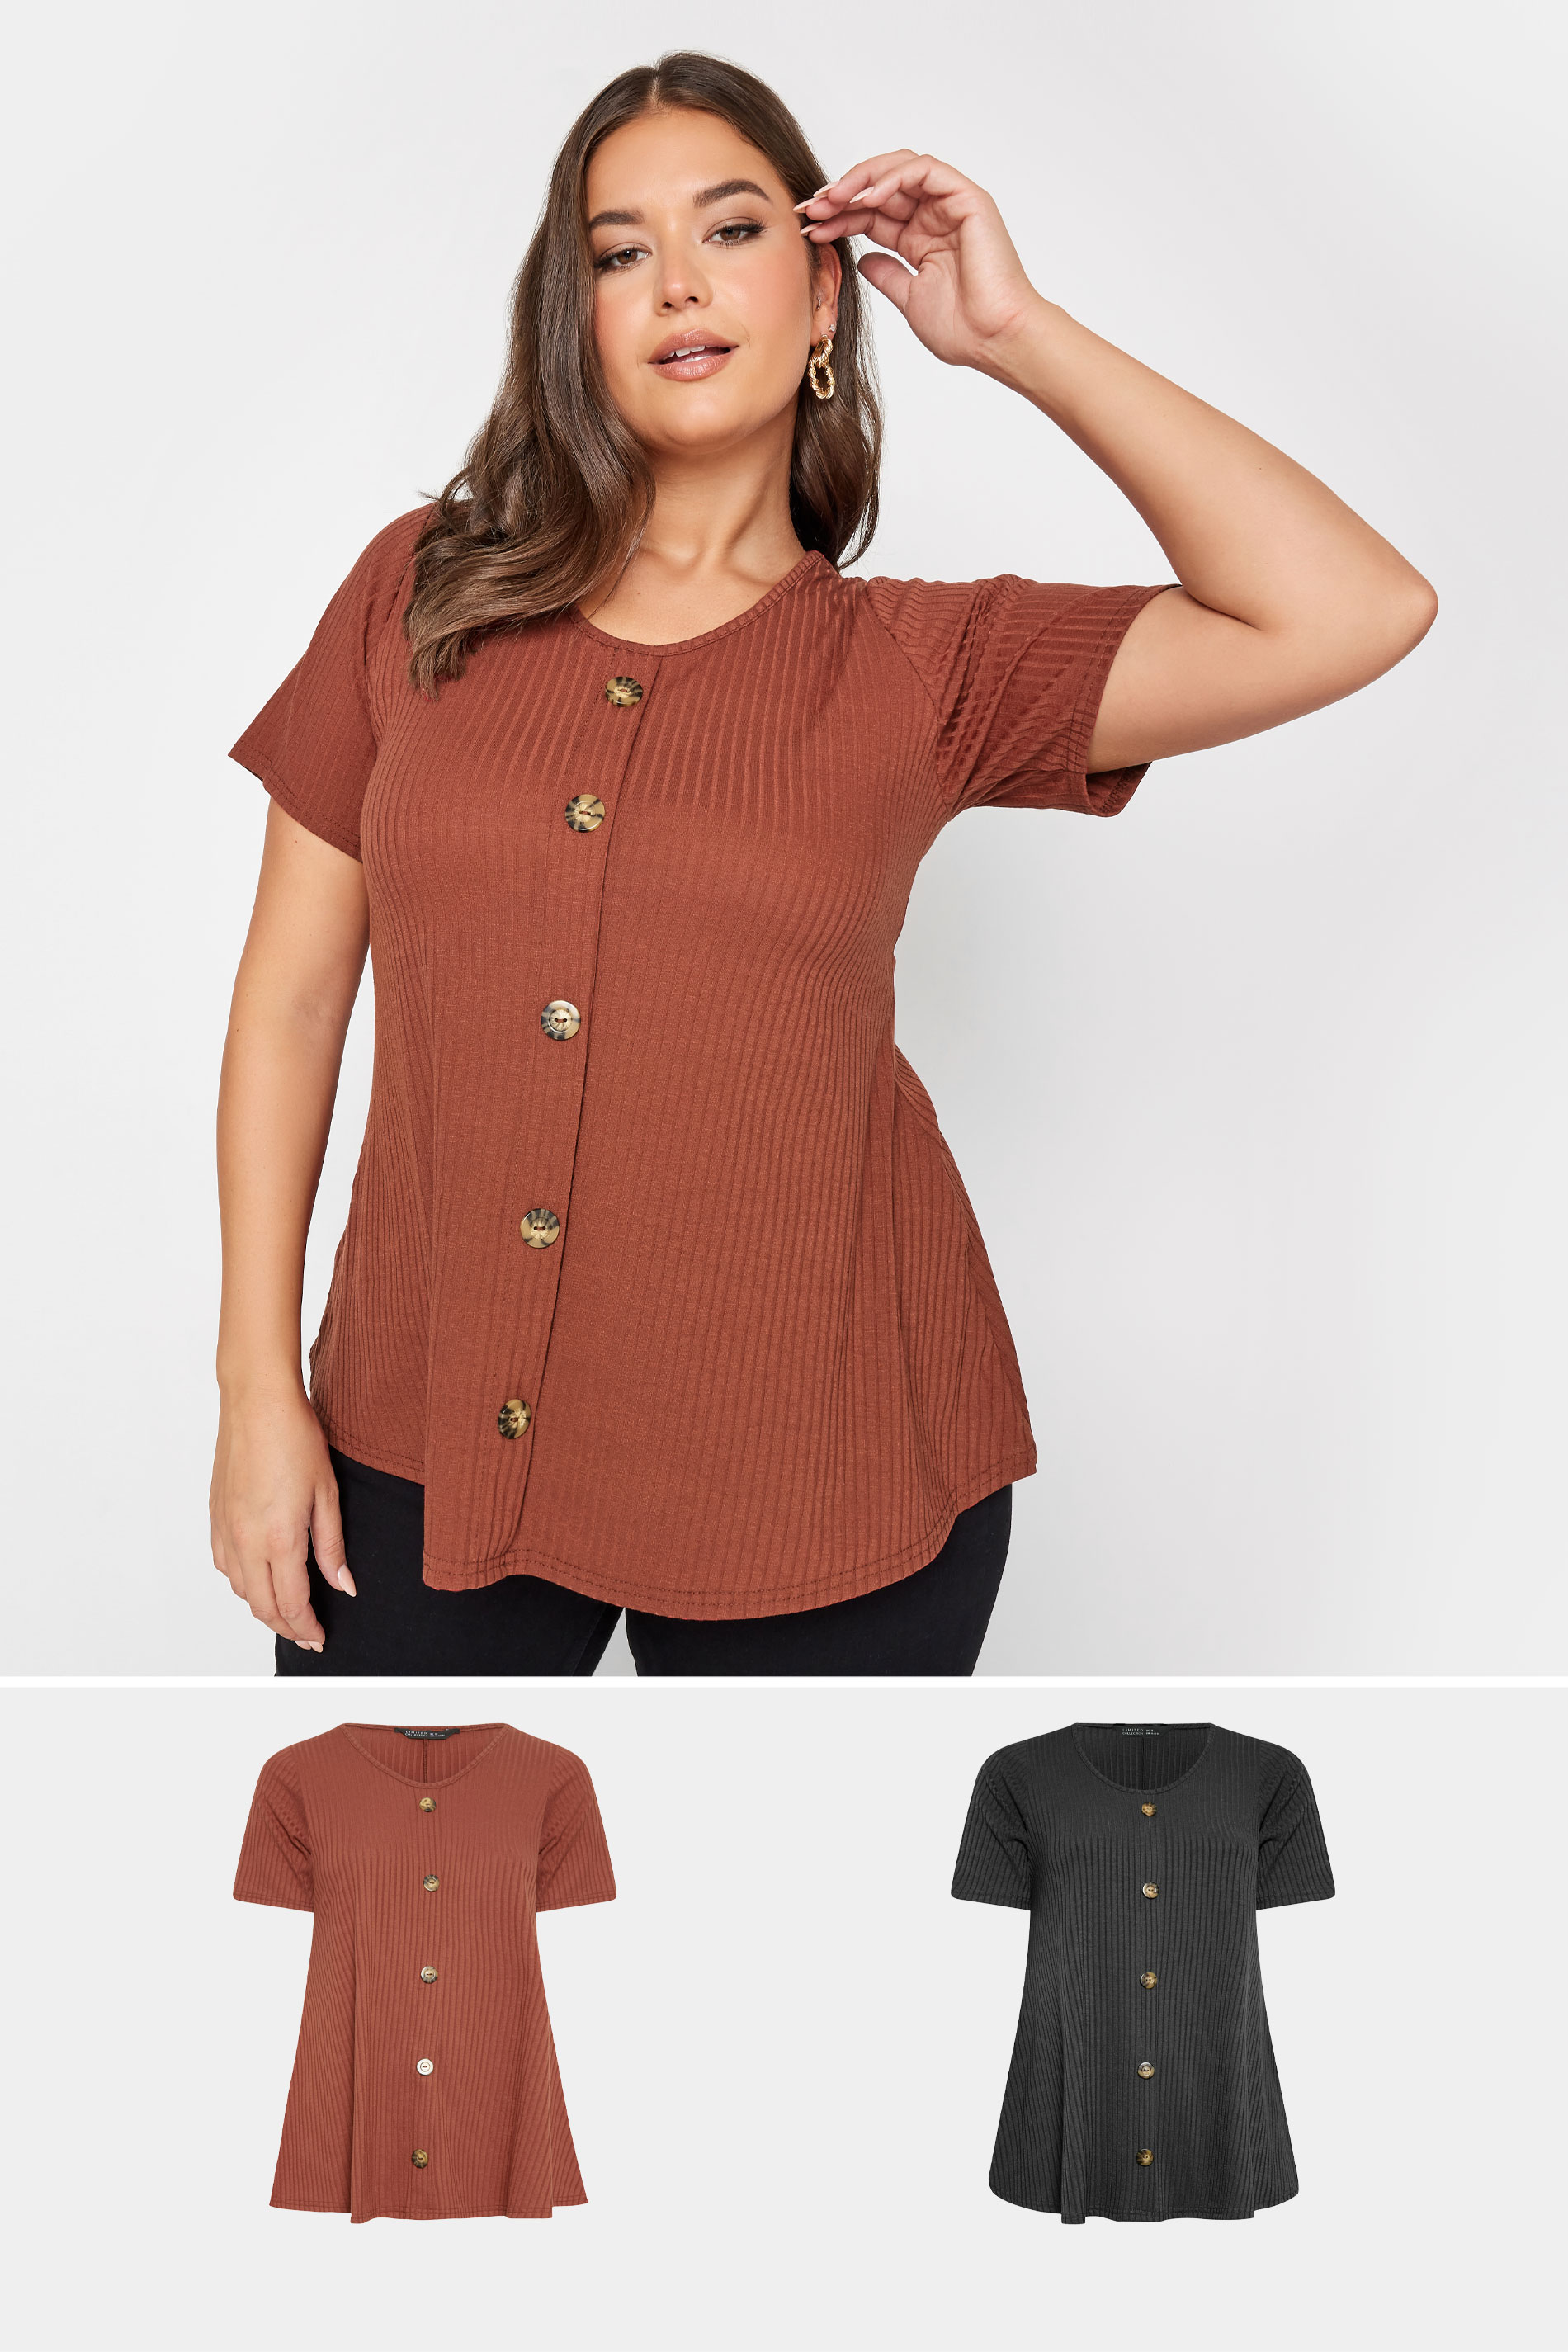 LIMITED COLLECTION 2 PACK Plus Size Curve Rust Orange & Black Ribbed Swing Tops | Yours Clothing  1